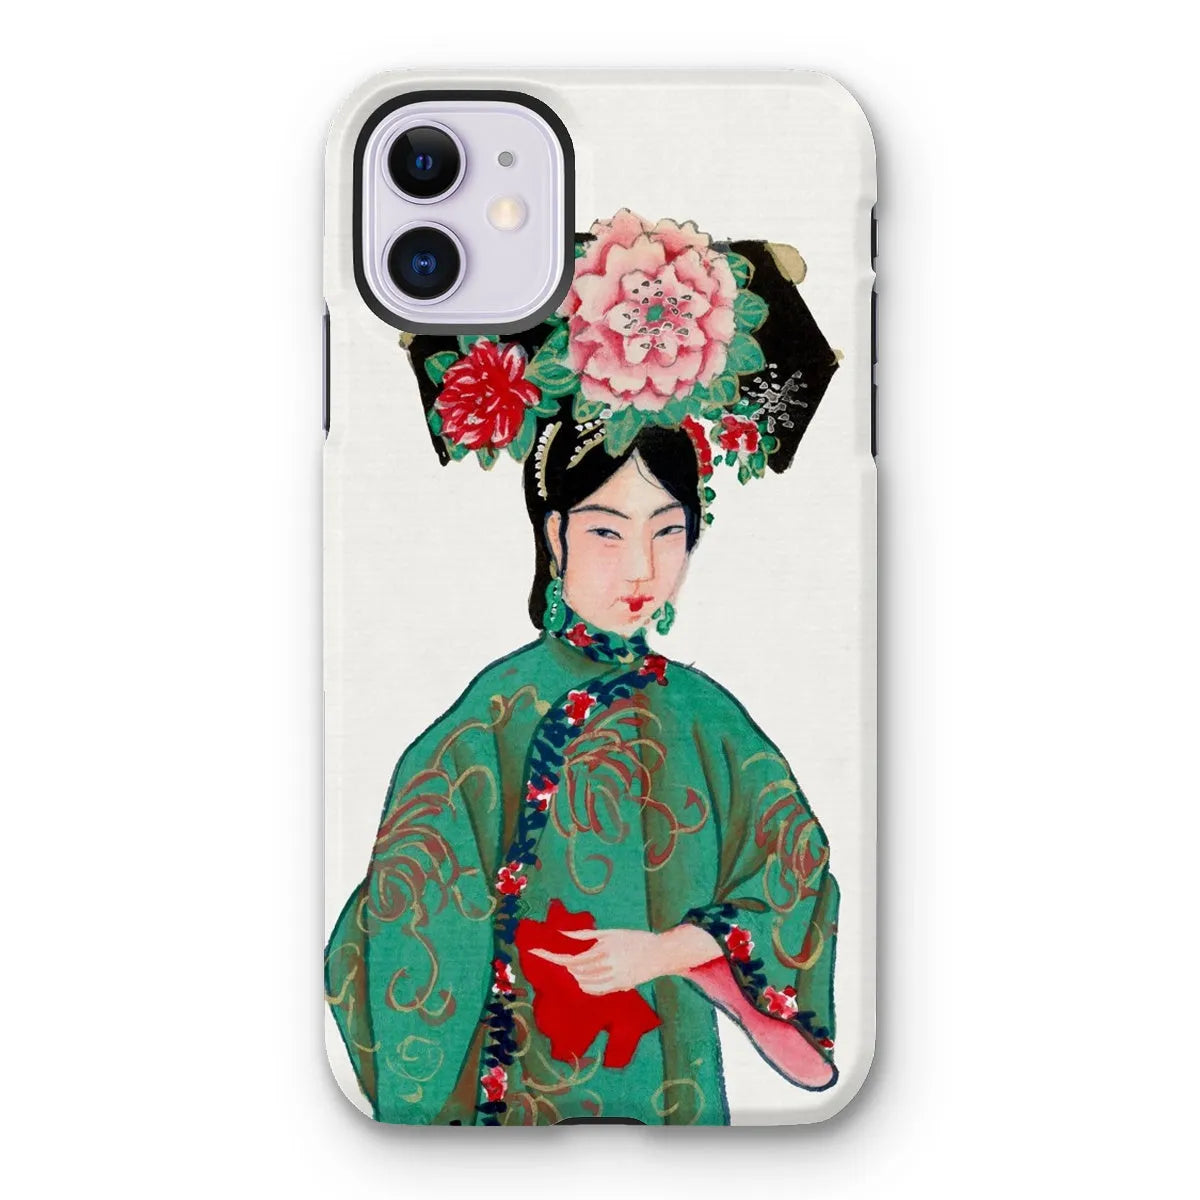 Chinese Noblewoman In Manchu Couture Art Phone Case - Iphone 11 / Matte - Mobile Phone Cases - Aesthetic Art